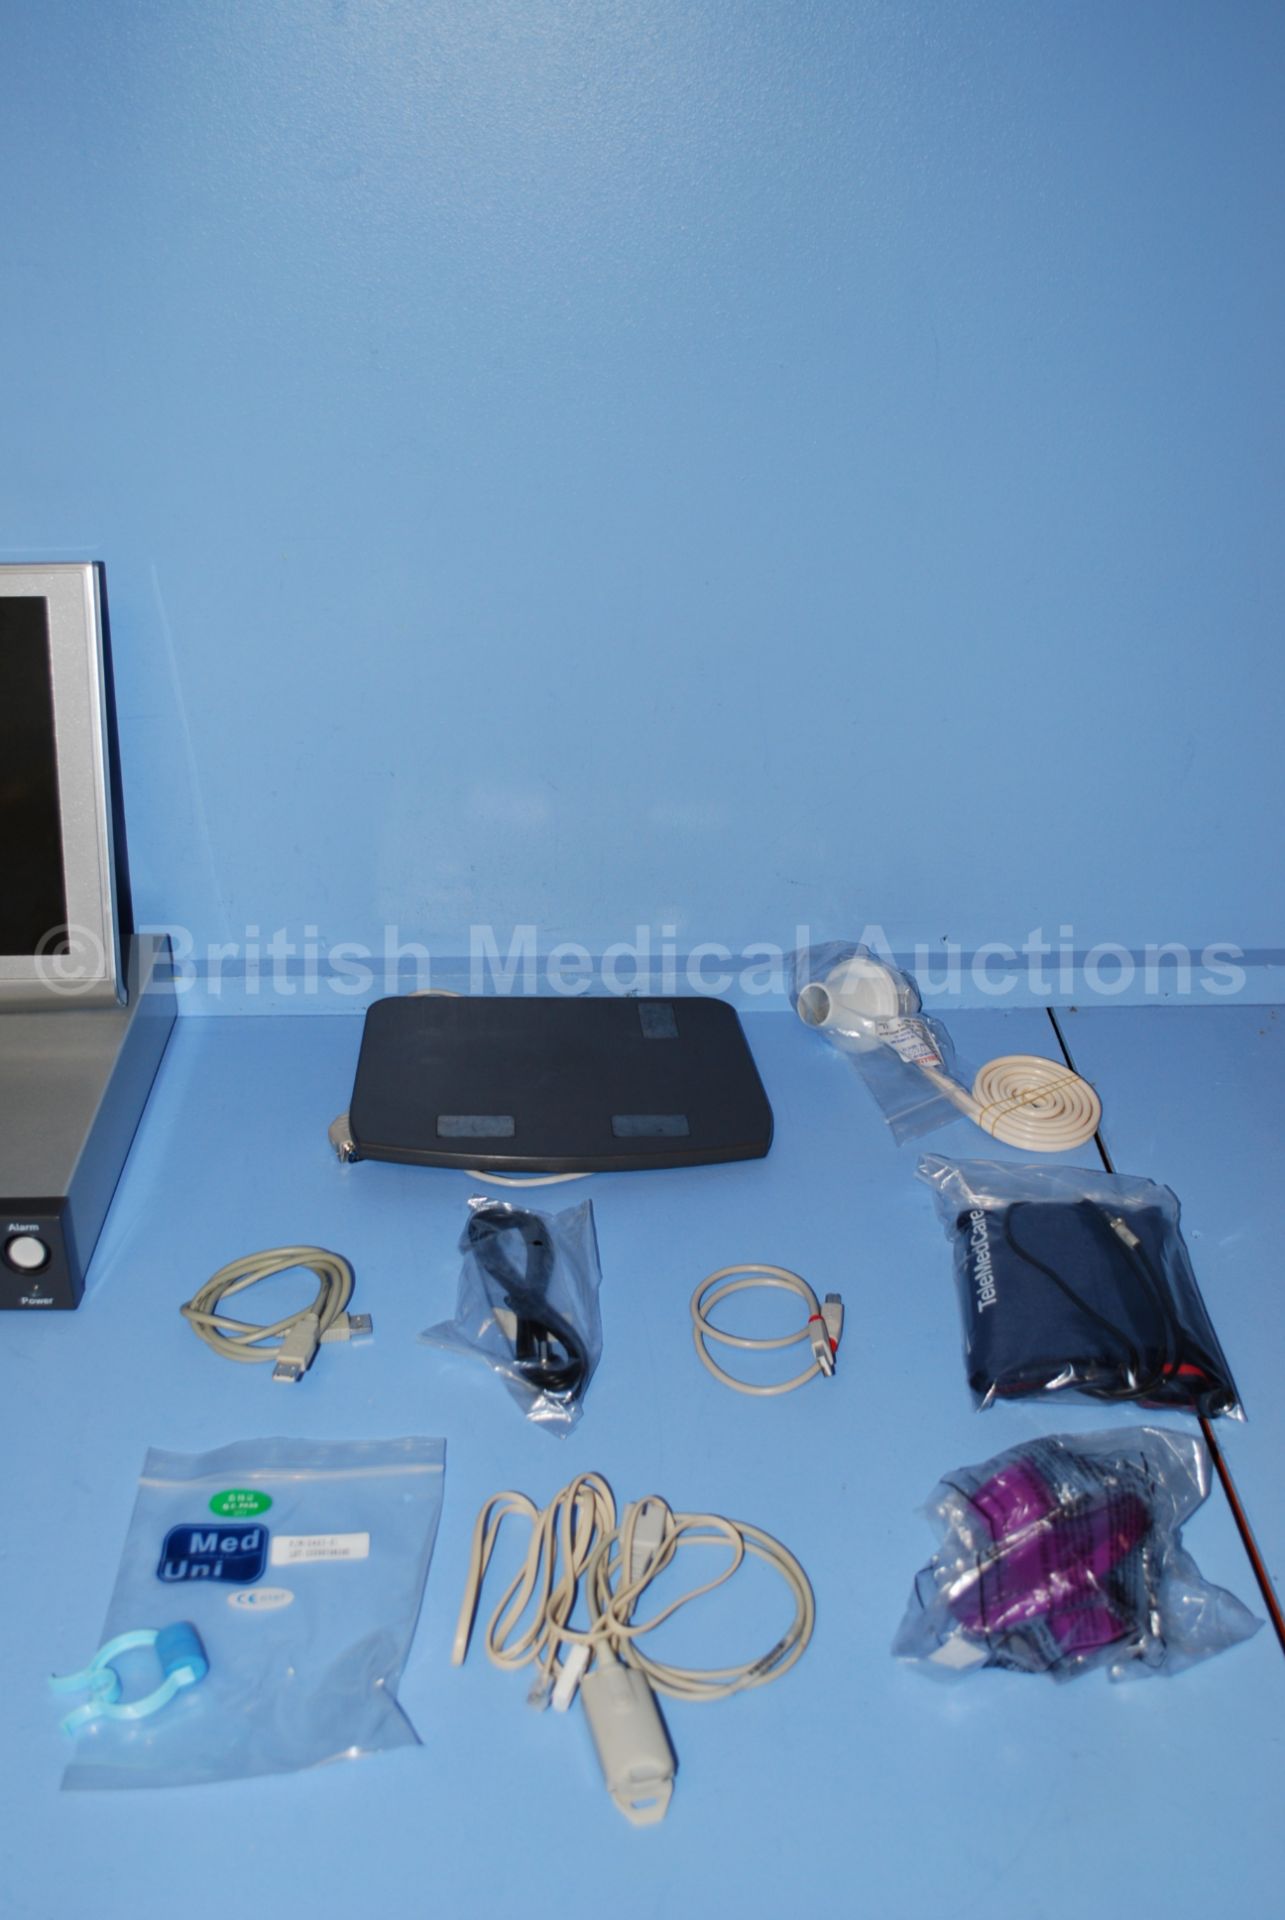 TeleMedCare Health Monitoring System Including Wor - Image 6 of 6